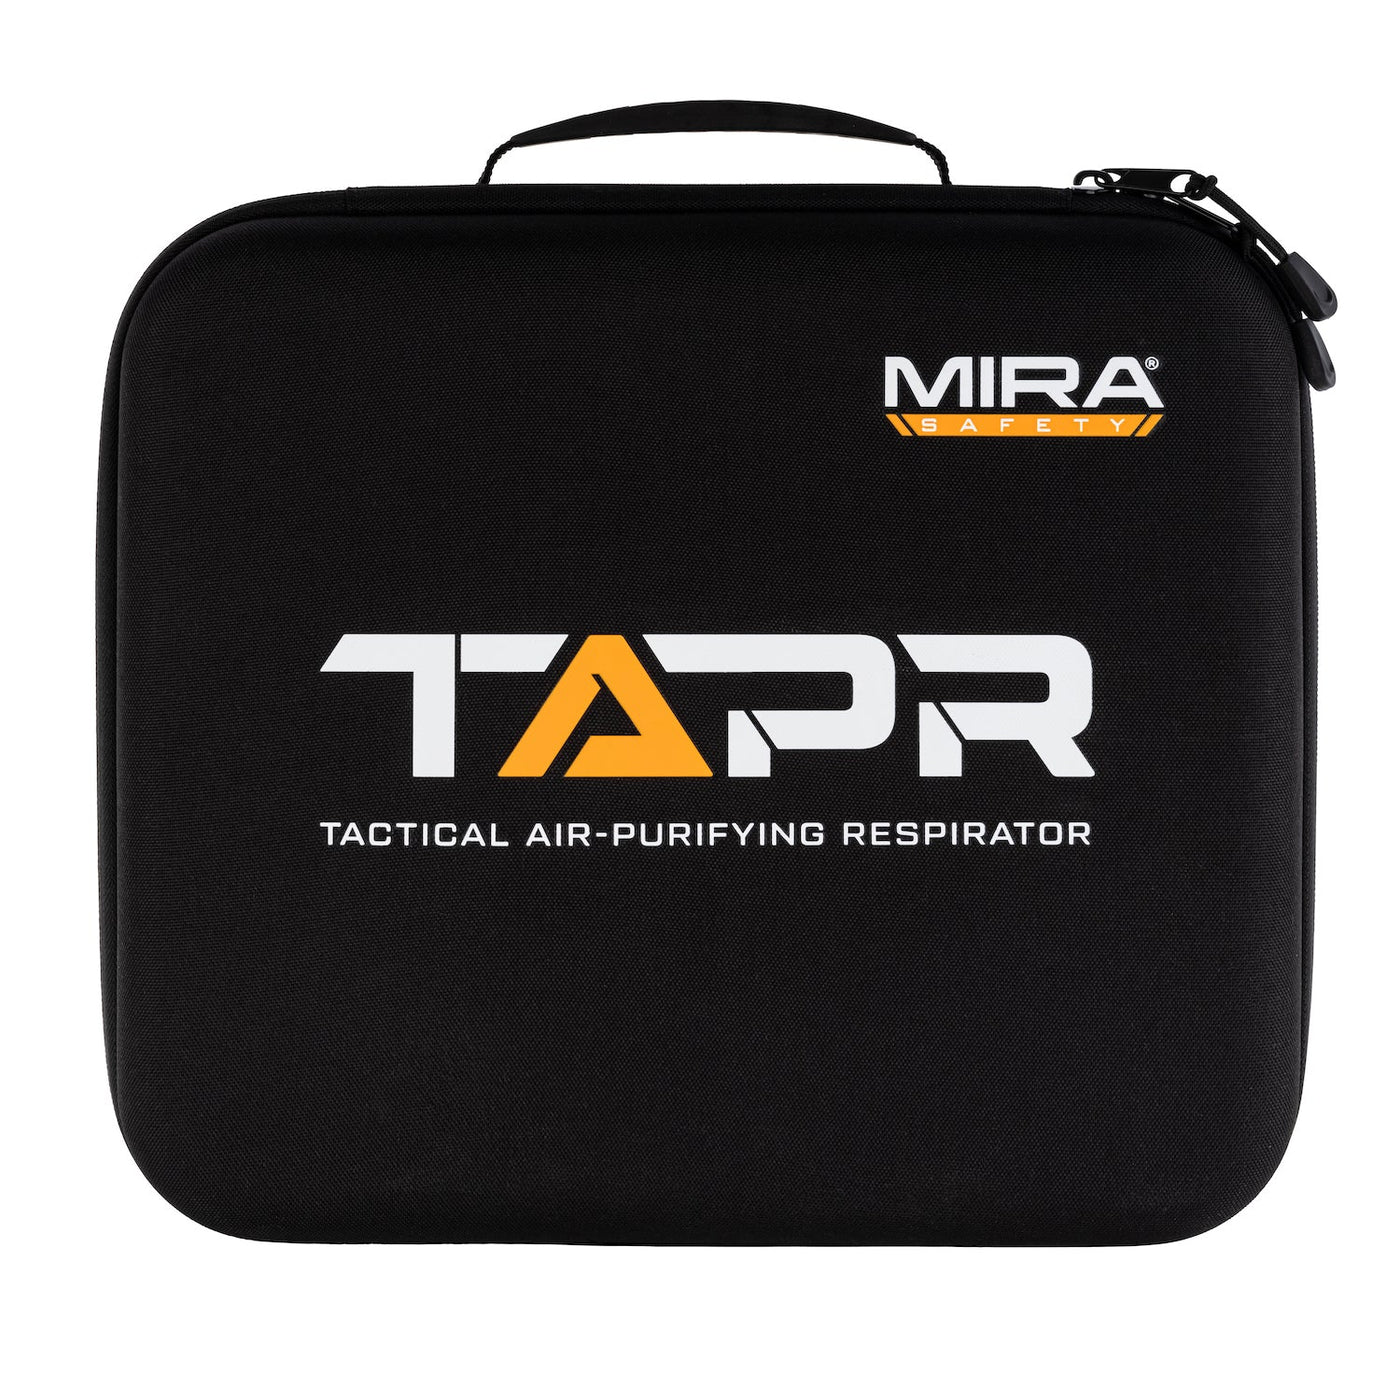 Tactical Air-Purifying Respirator mask kit (TAPR) on white background